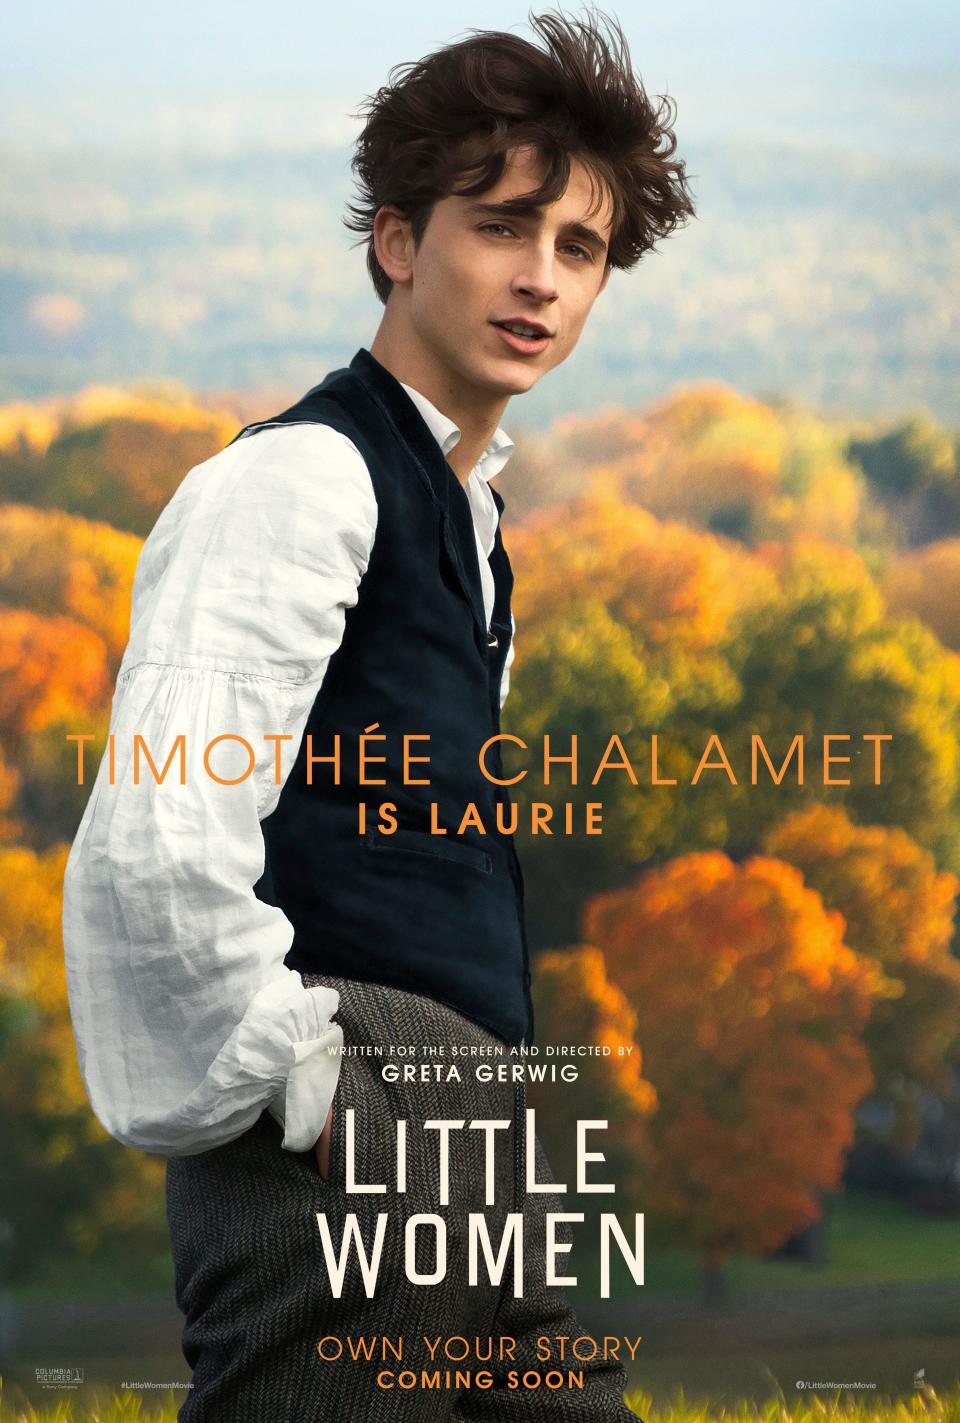 <h1 class="title">RELEASE DATE: December 25, 2019 TITLE: Little Women STUDIO: Columbia Pictures DIRECTOR: Greta Gerwig PLOT: Four sisters come of age in America in the aftermath of the Civil War STARRING: TIMOTHEE CHALAMET as Theodore 'Laurie' Laurence. Poster Art. (Credit Image: © Columbia Pictures/Entertainment Pictures)</h1><cite class="credit">© Columbia Pictures/Entertainment Pictures</cite>